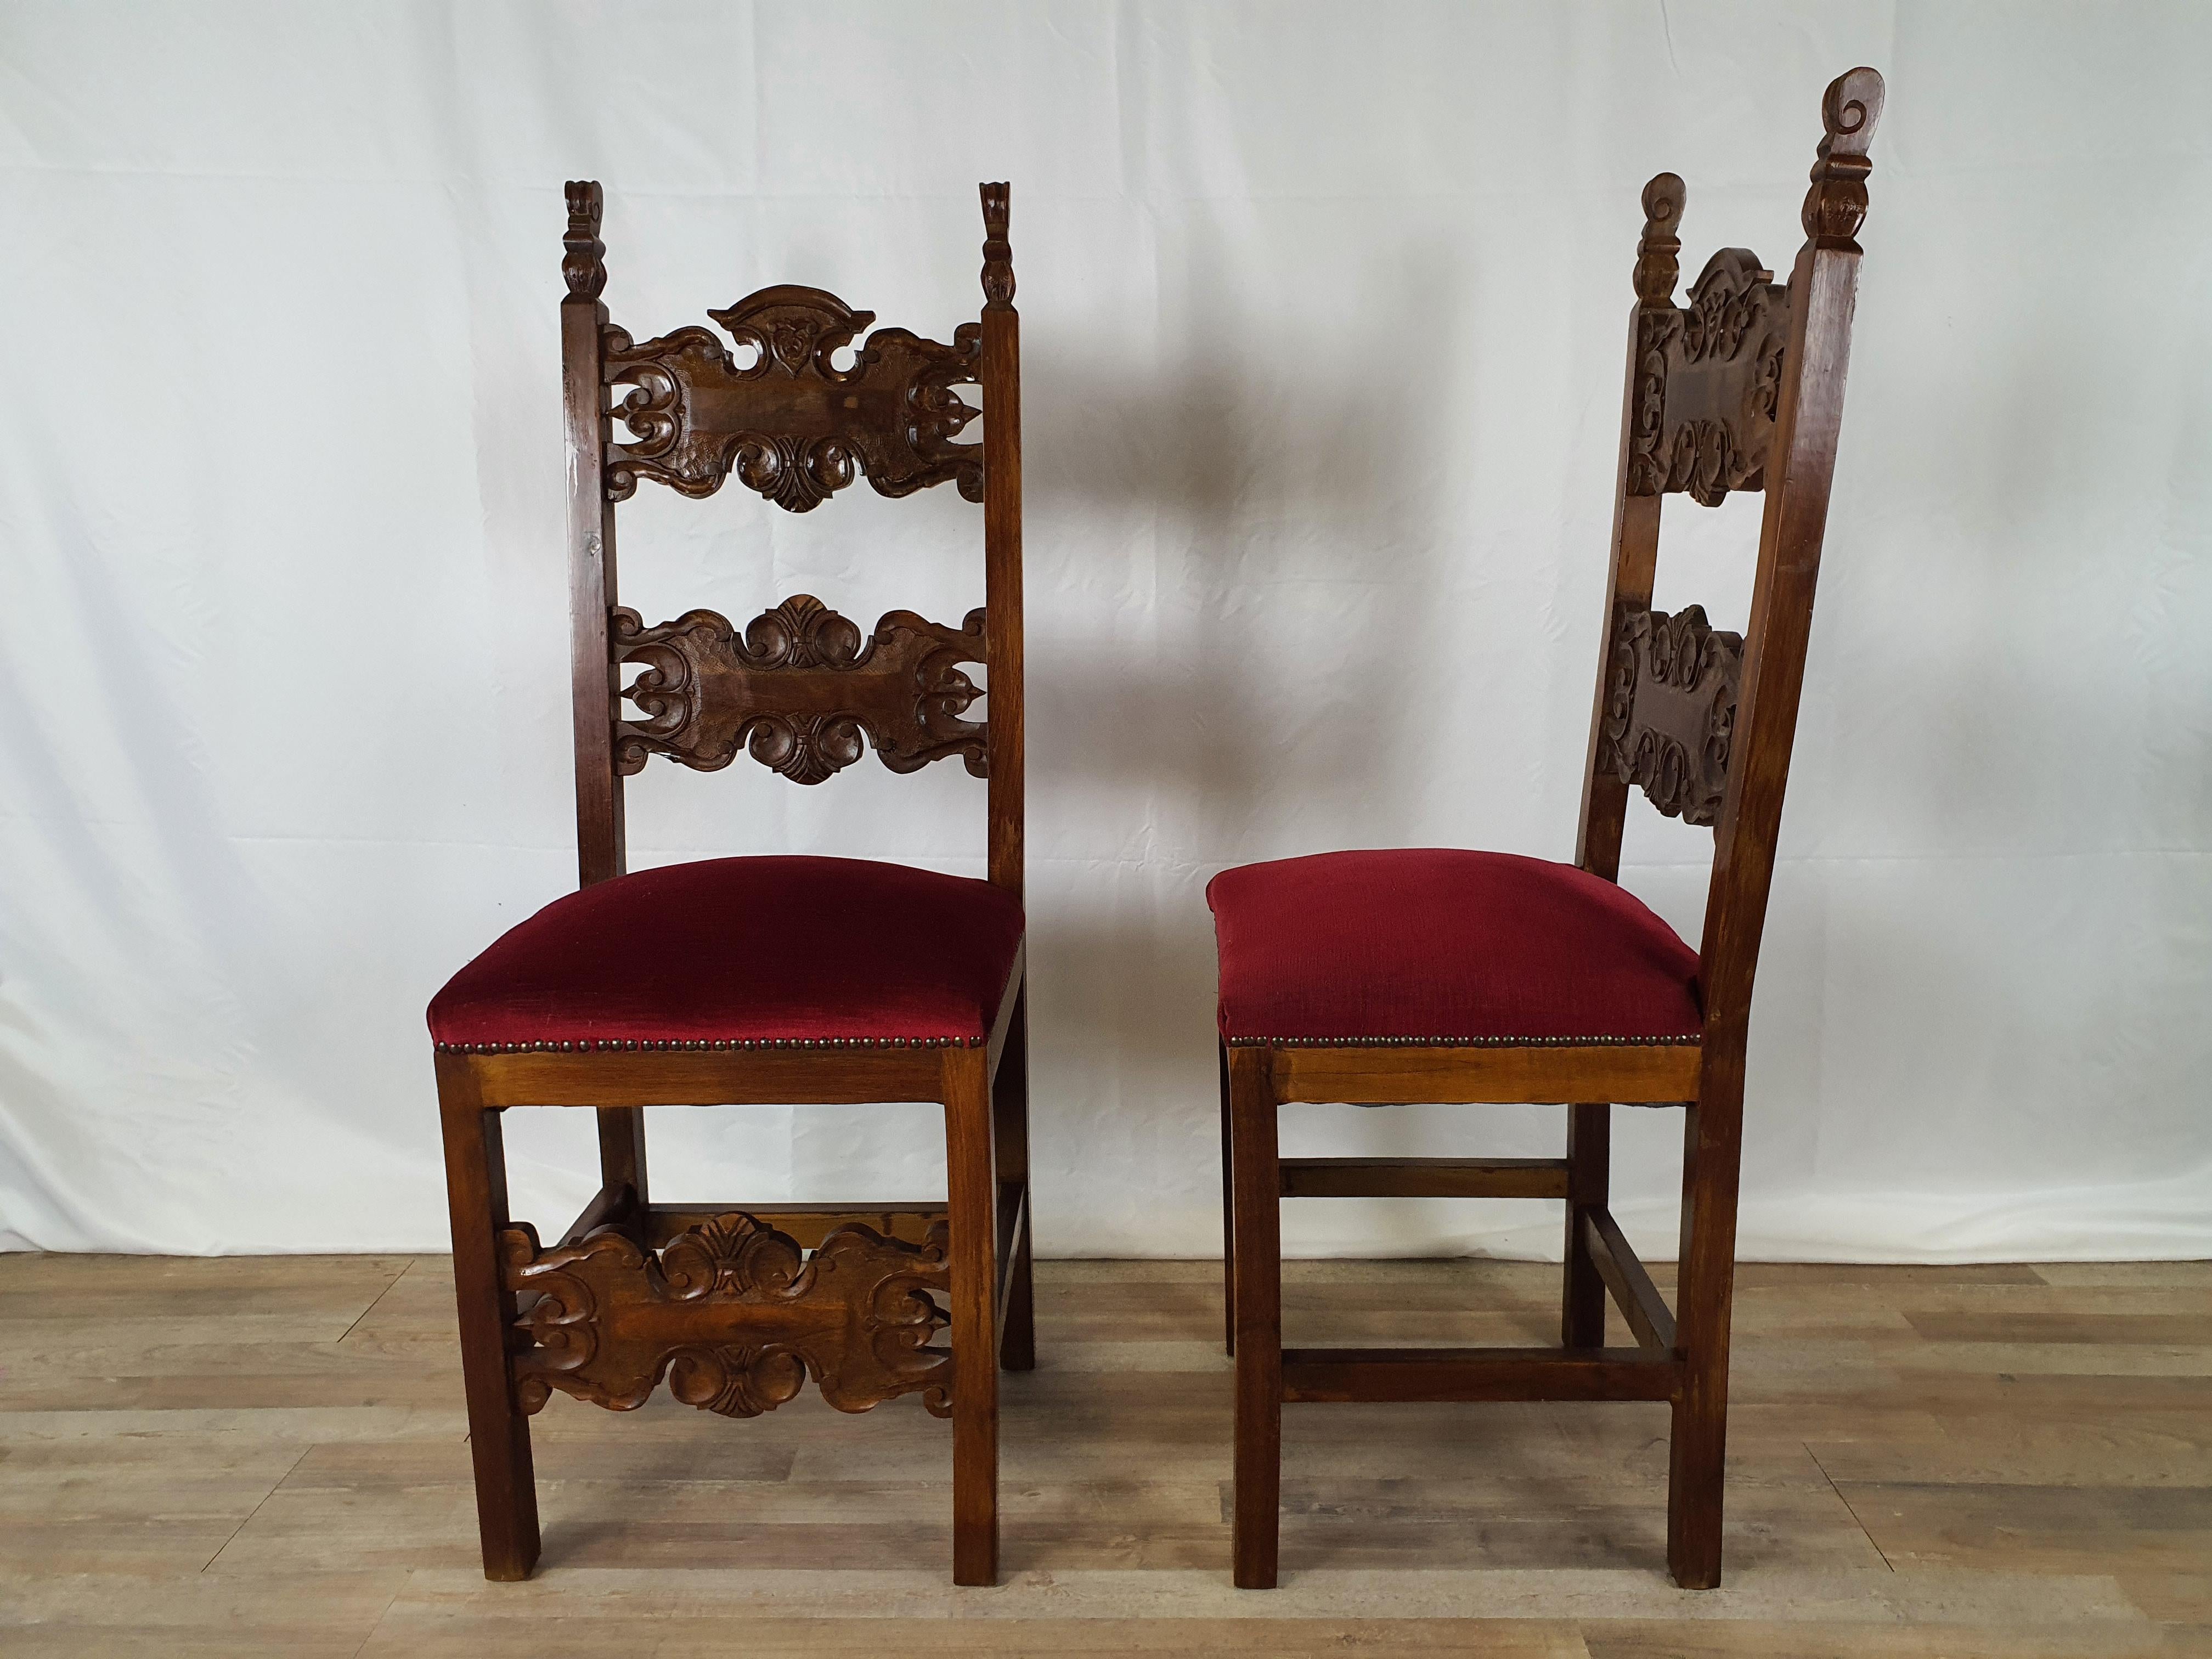 Renaissance Revival Pair of Renaissance Chairs from the Early 1900s